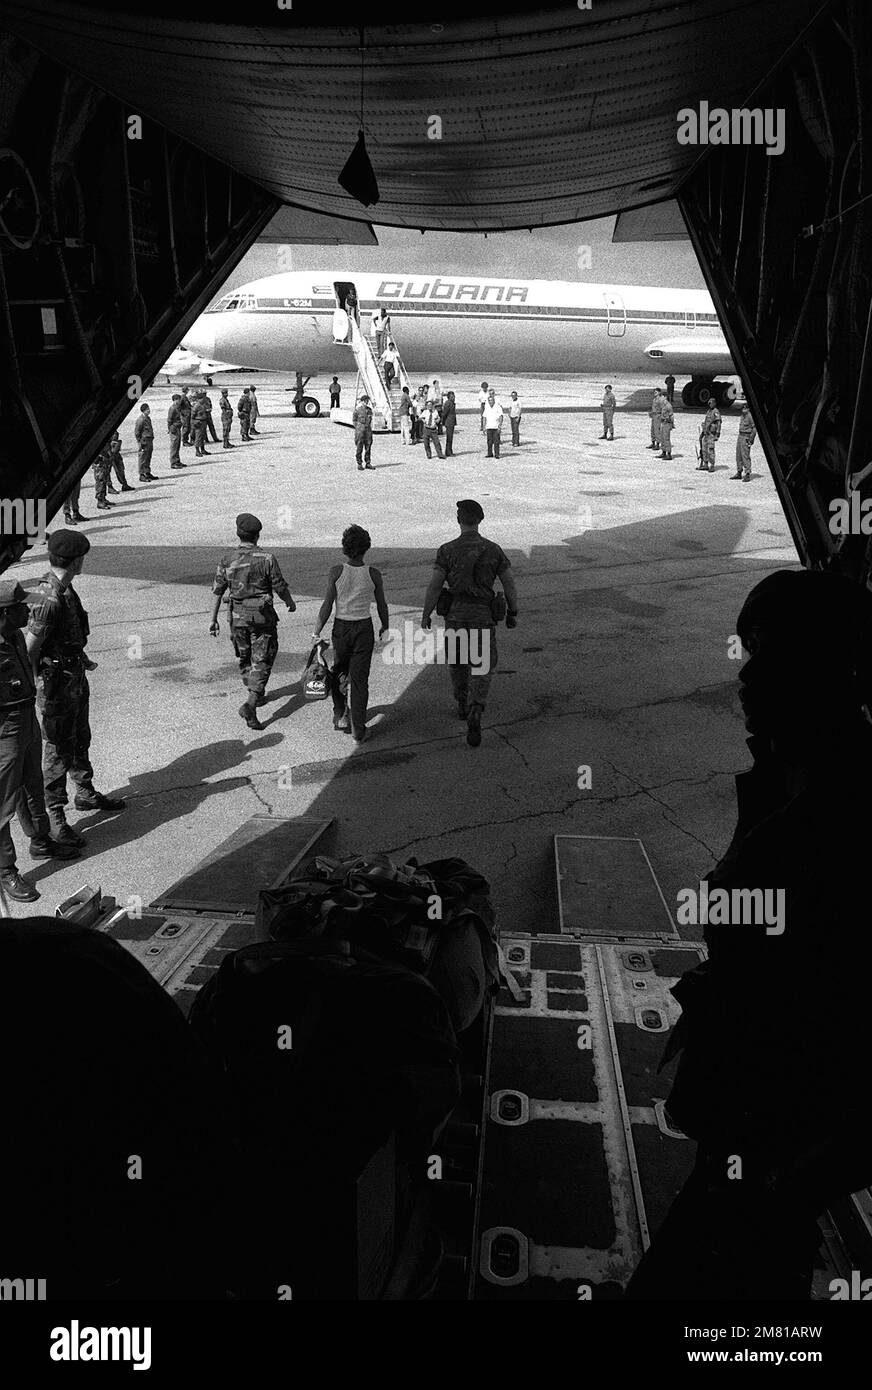 U.S. Air Force security police stand guard as Cuban nationals are transferred from a C-130 Hercules aircraft to a Cuban I1-62M airliner. They are being returned to Cuba after being captured on Grenada during the multiservice, multinational Operation Urgent Fury. He is being transferred from the C-130 Hercules aircraft to a Cuban airliner that will return him to Cuba. Subject Operation/Series: URGENT FURY Base: Seawell International Airport Country: Bangladesh (BGD) Stock Photo